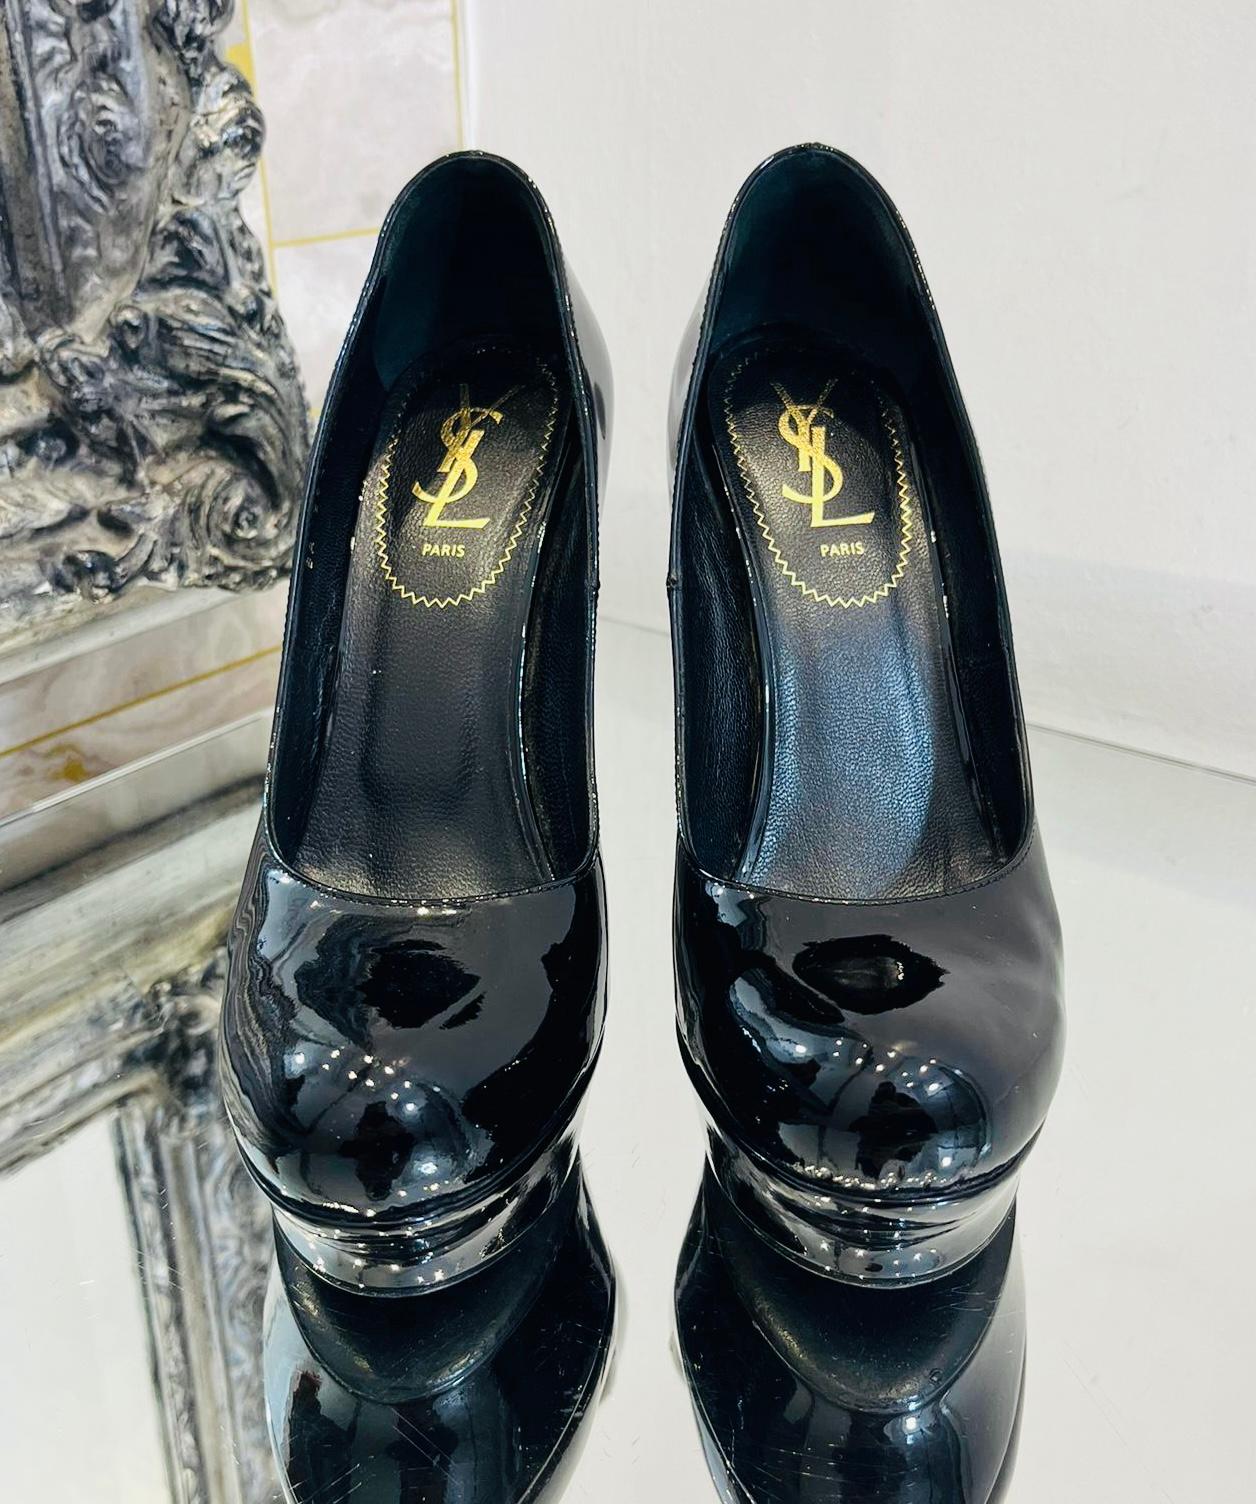 Saint Laurent Tribtoo Patent Leather Pumps

Glossy black heels designed with almond toe and high platform.

Featuring thick stiletto heel and leather lining and insoles.

Size – 38

Condition – Very Good

Composition – Patent Leather

Comes with –